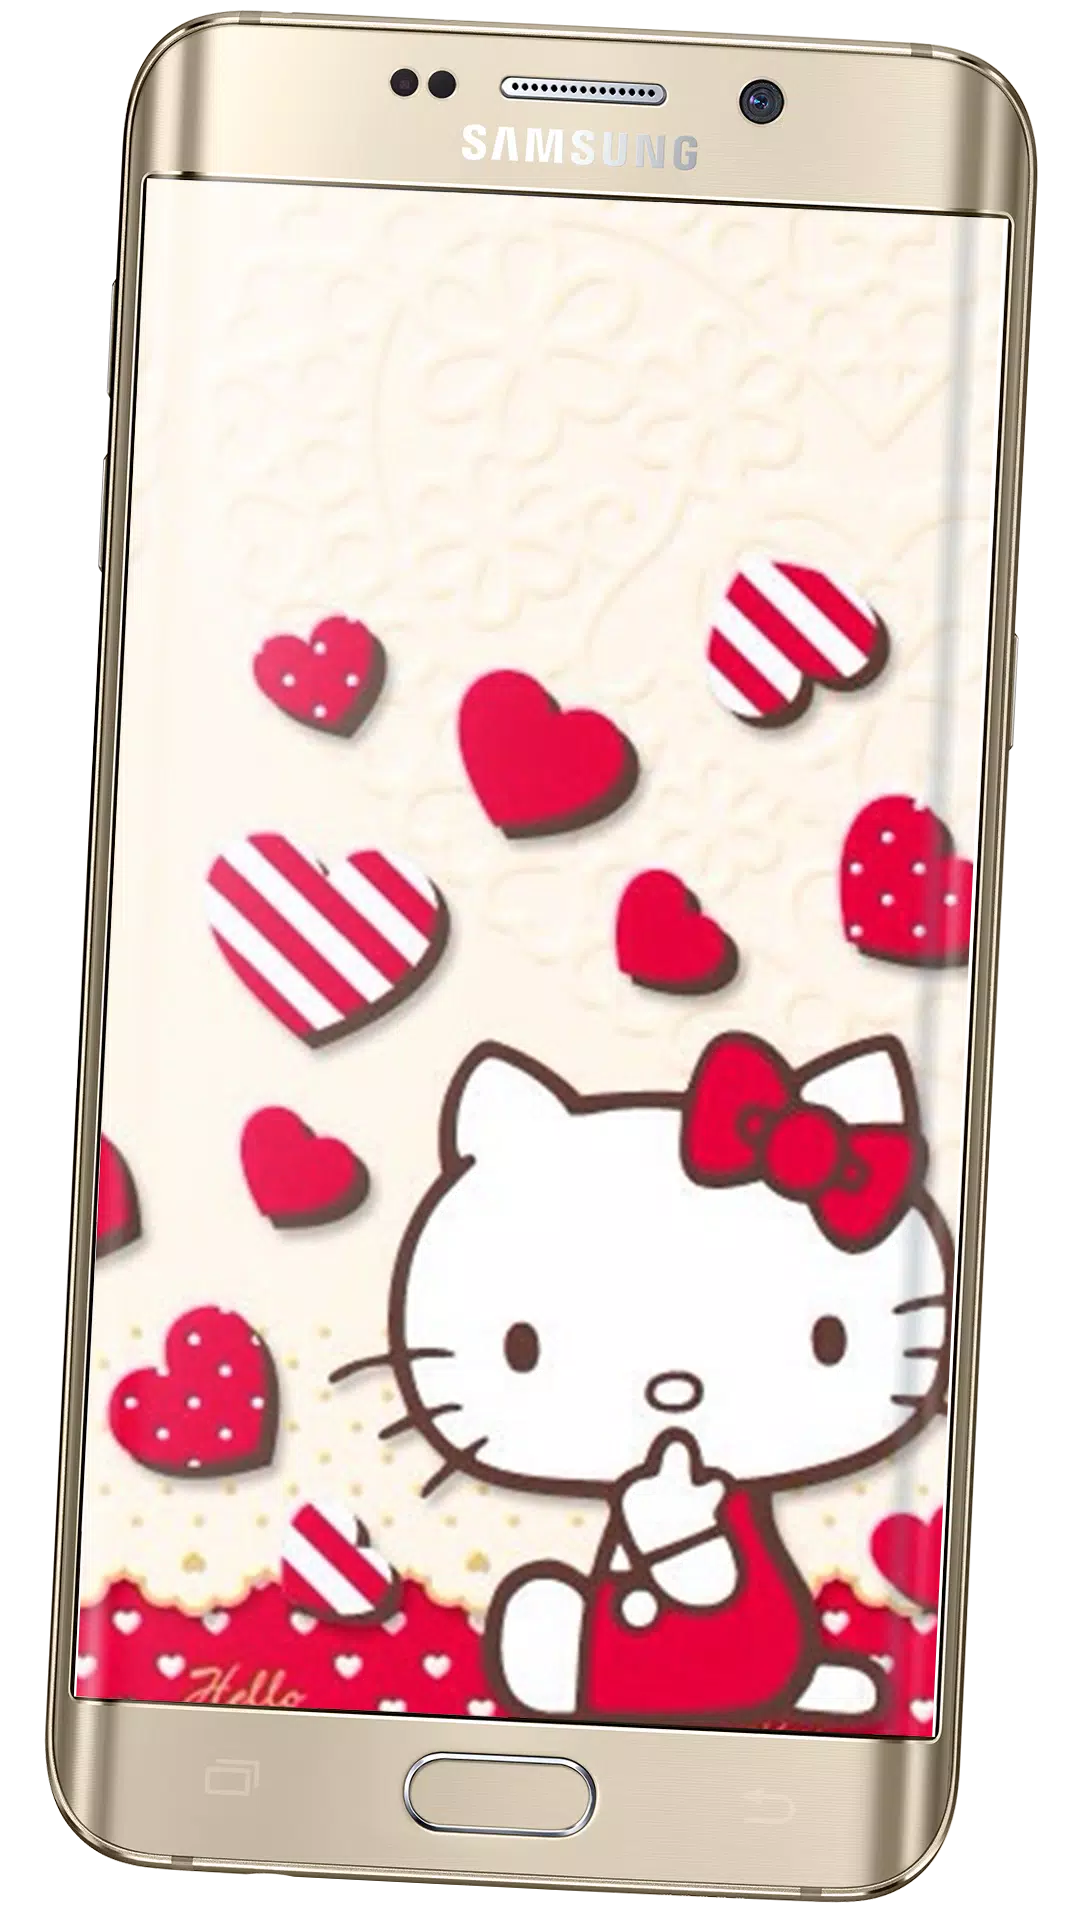 Hello Kitty LV Wallpaper - Download to your mobile from PHONEKY